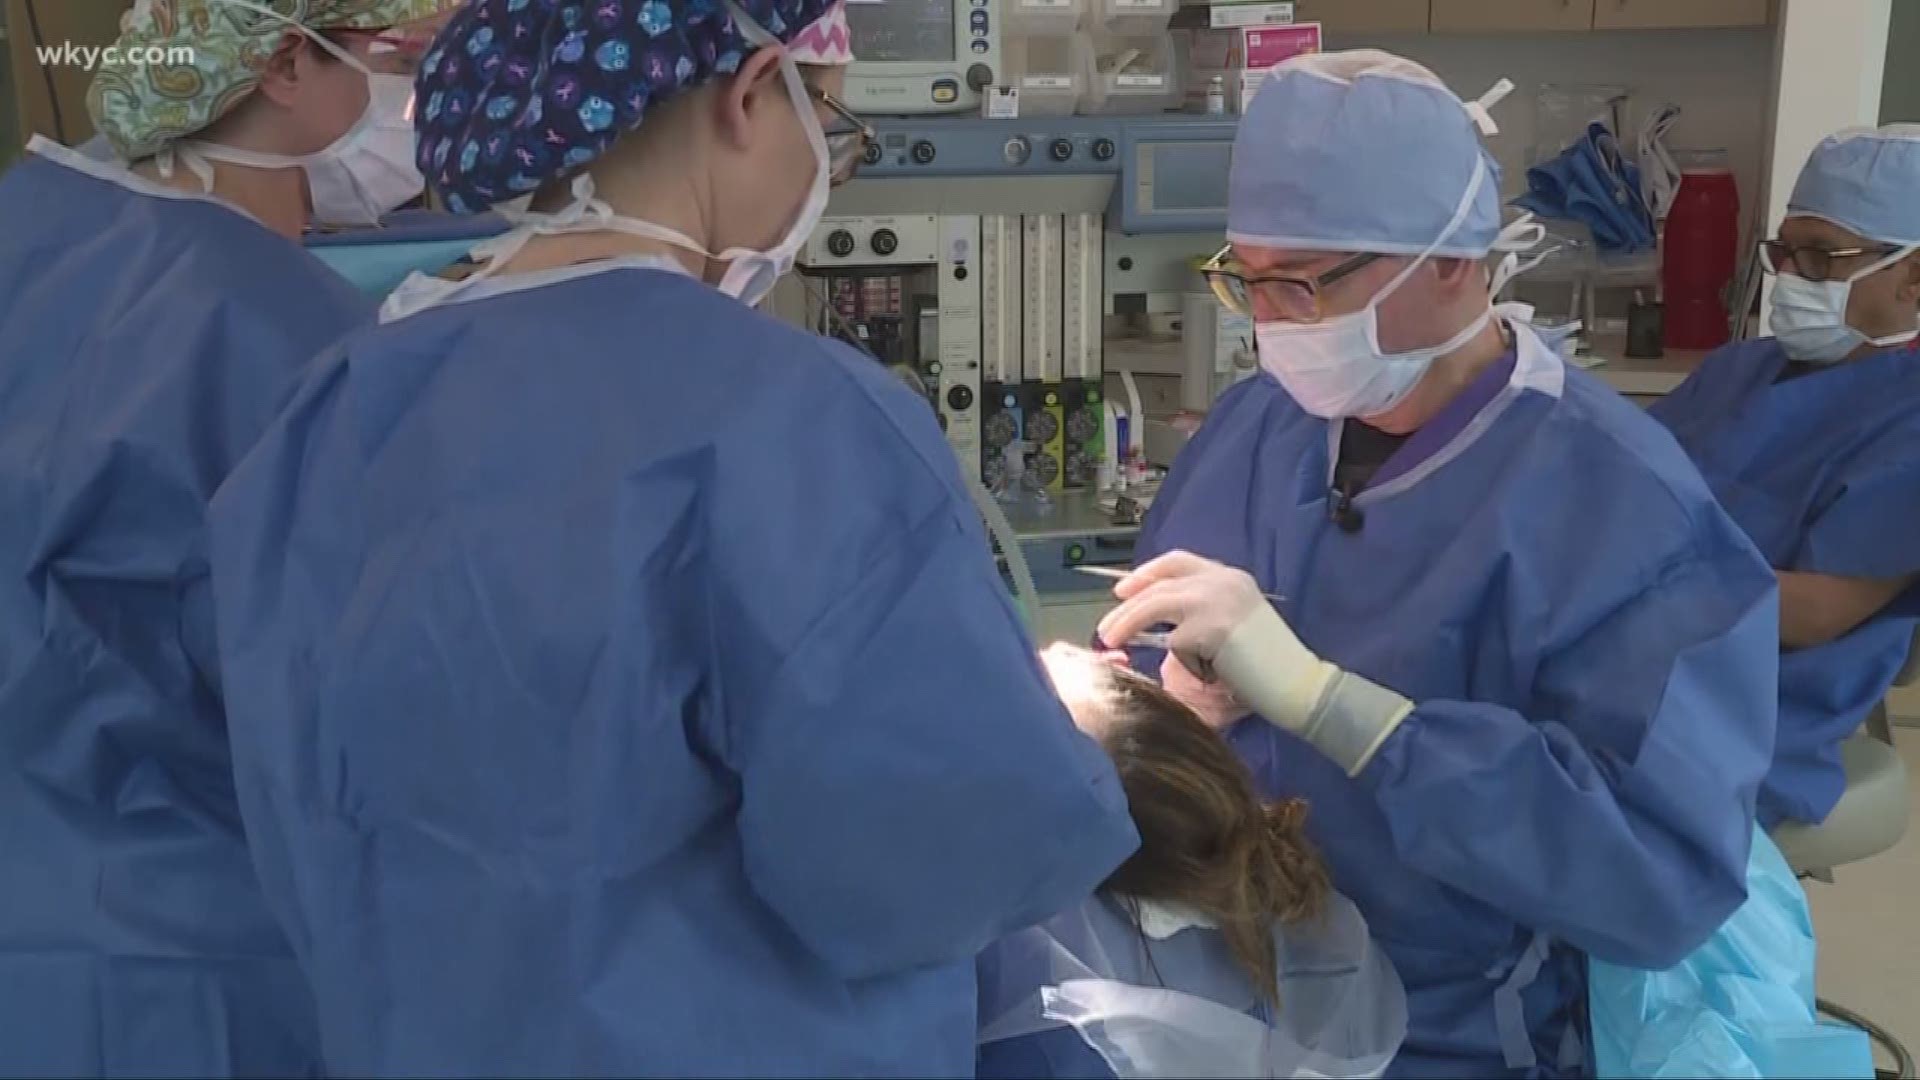 You can watch the entire procedure on WKYC.com.